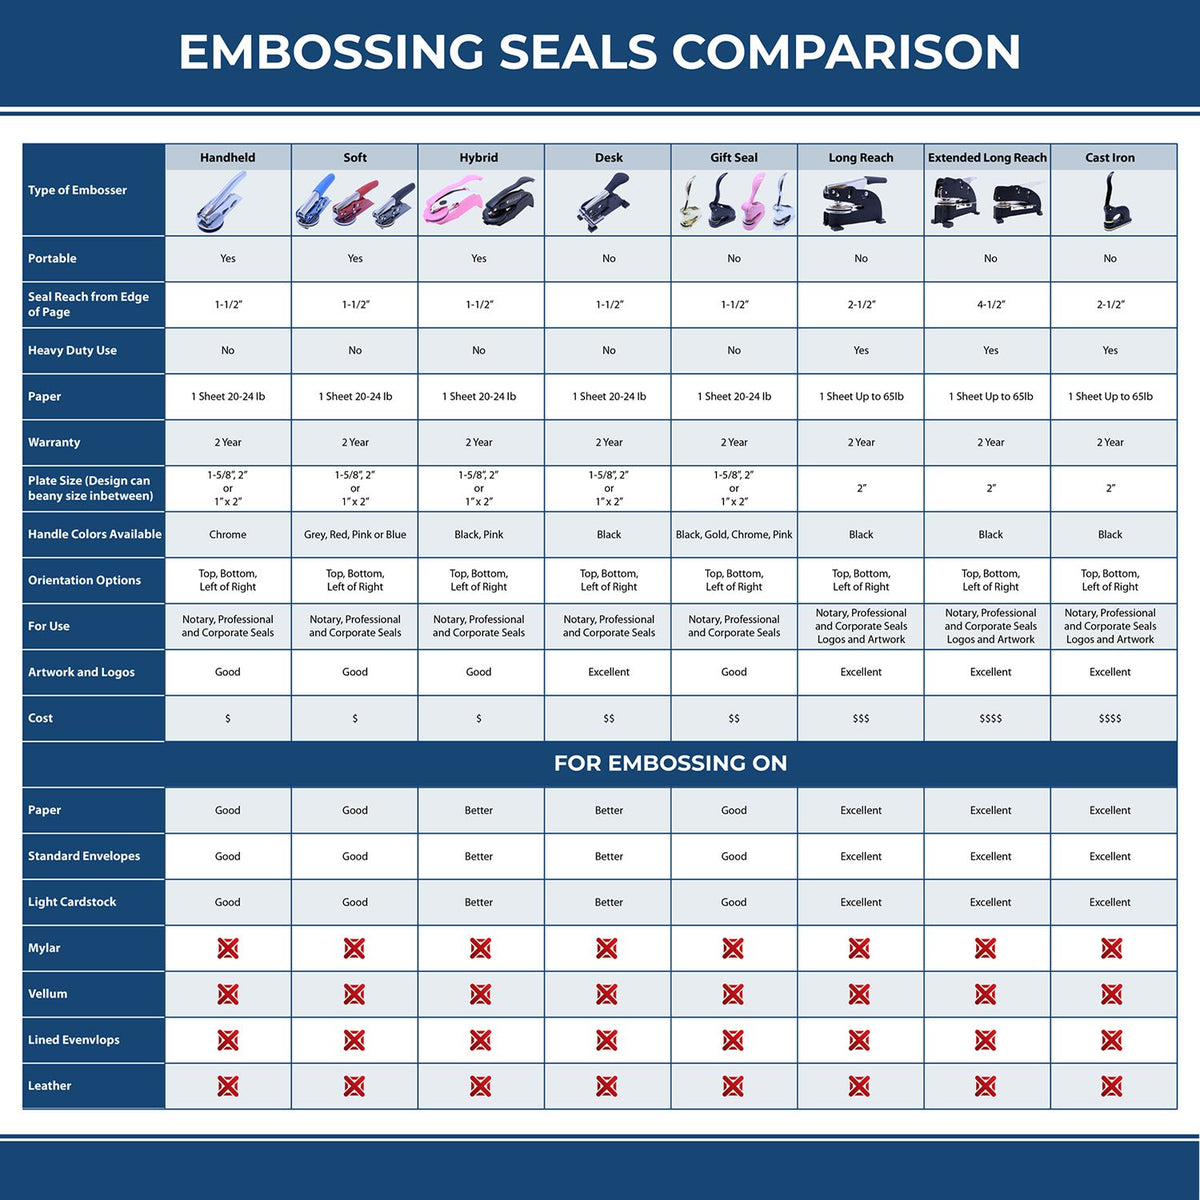 A comparison chart for the different types of mount models available for the Arizona Engineer Desk Seal.